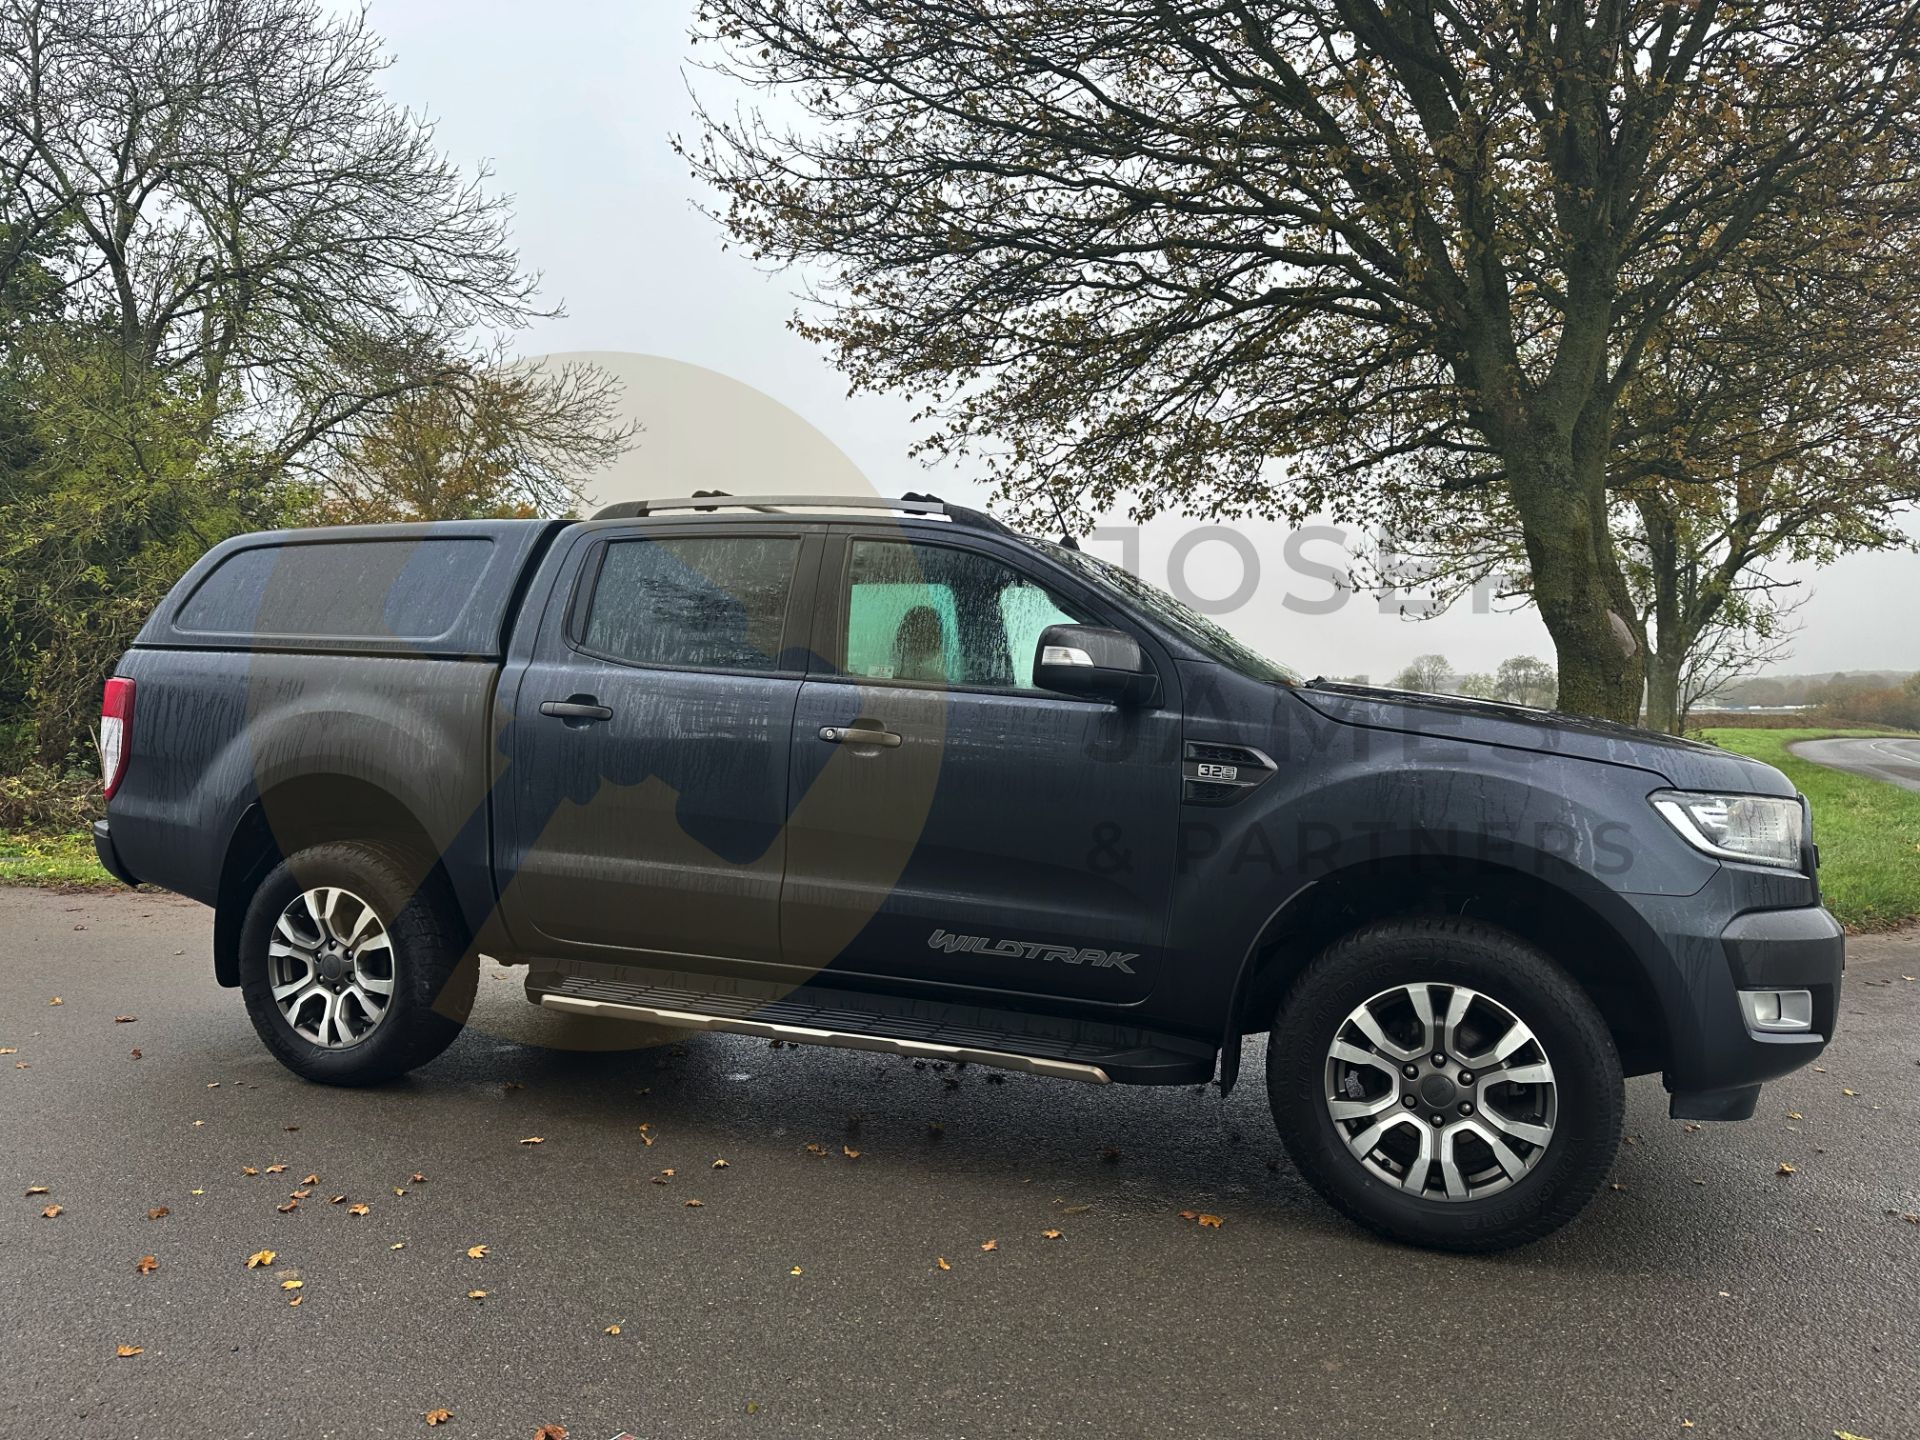 FORD RANGER *WILDTRAK EDITION* DOUBLE CAB PICK-UP (2019 - EURO 6) 3.2 TDCI - AUTOMATIC (1 OWNER)